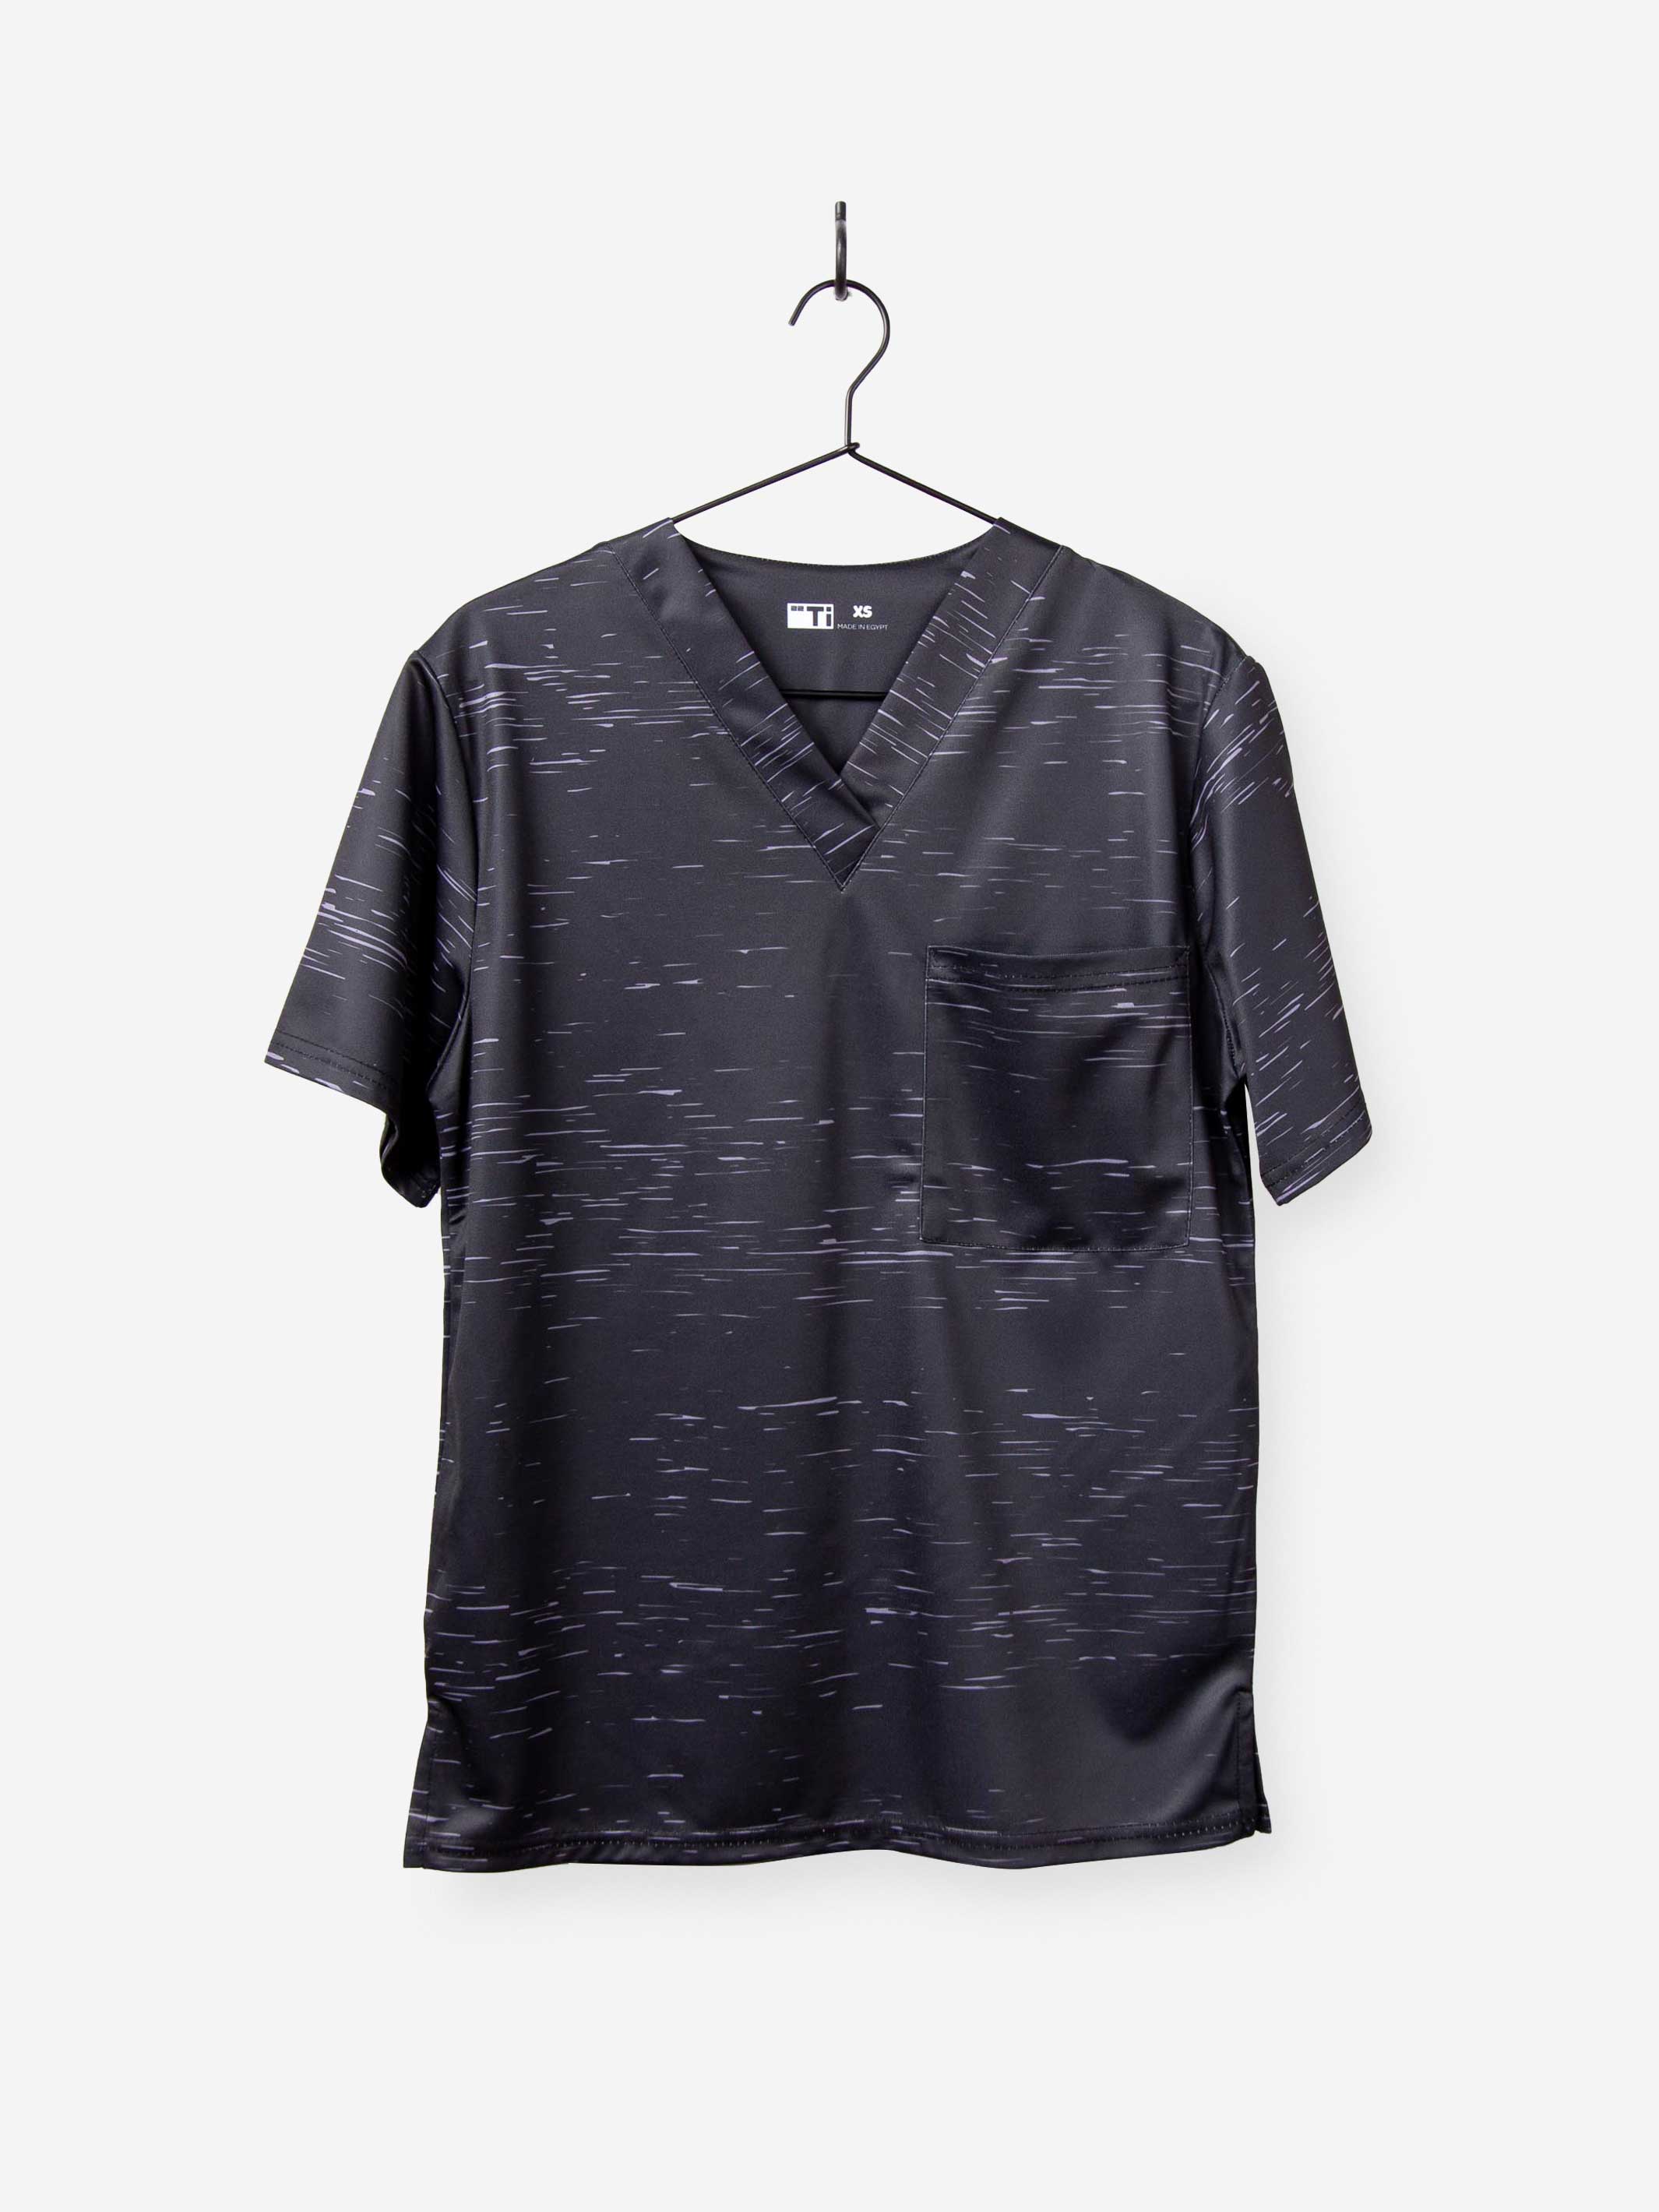 Men's Cool Print Scrub Top with Athletic Stripes and Static in Black with Chest Pocket